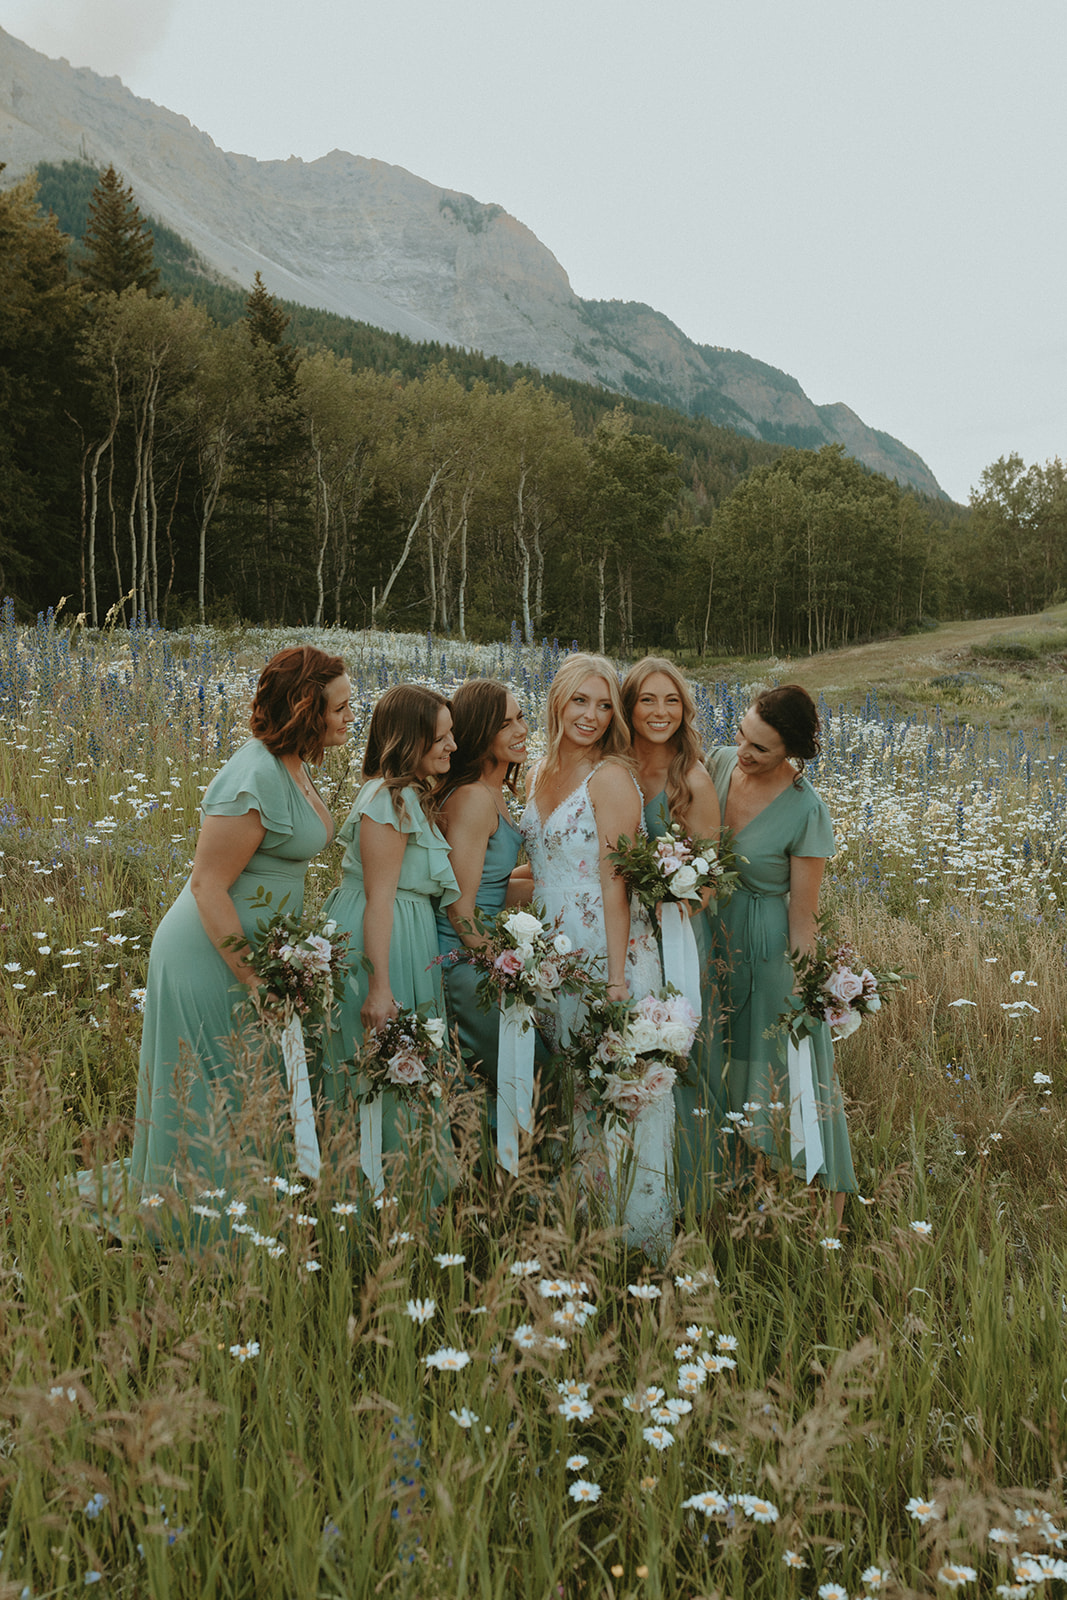 Bridal party portraits in a field of wildflowers for a mountain wedding. Sage Green mismatched bridesmaid dresses in this outdoor wedding inspiration, wildflower and mountain portraits, boho wedding inspiration, summer wedding, wedding portraits, bridal party portraits